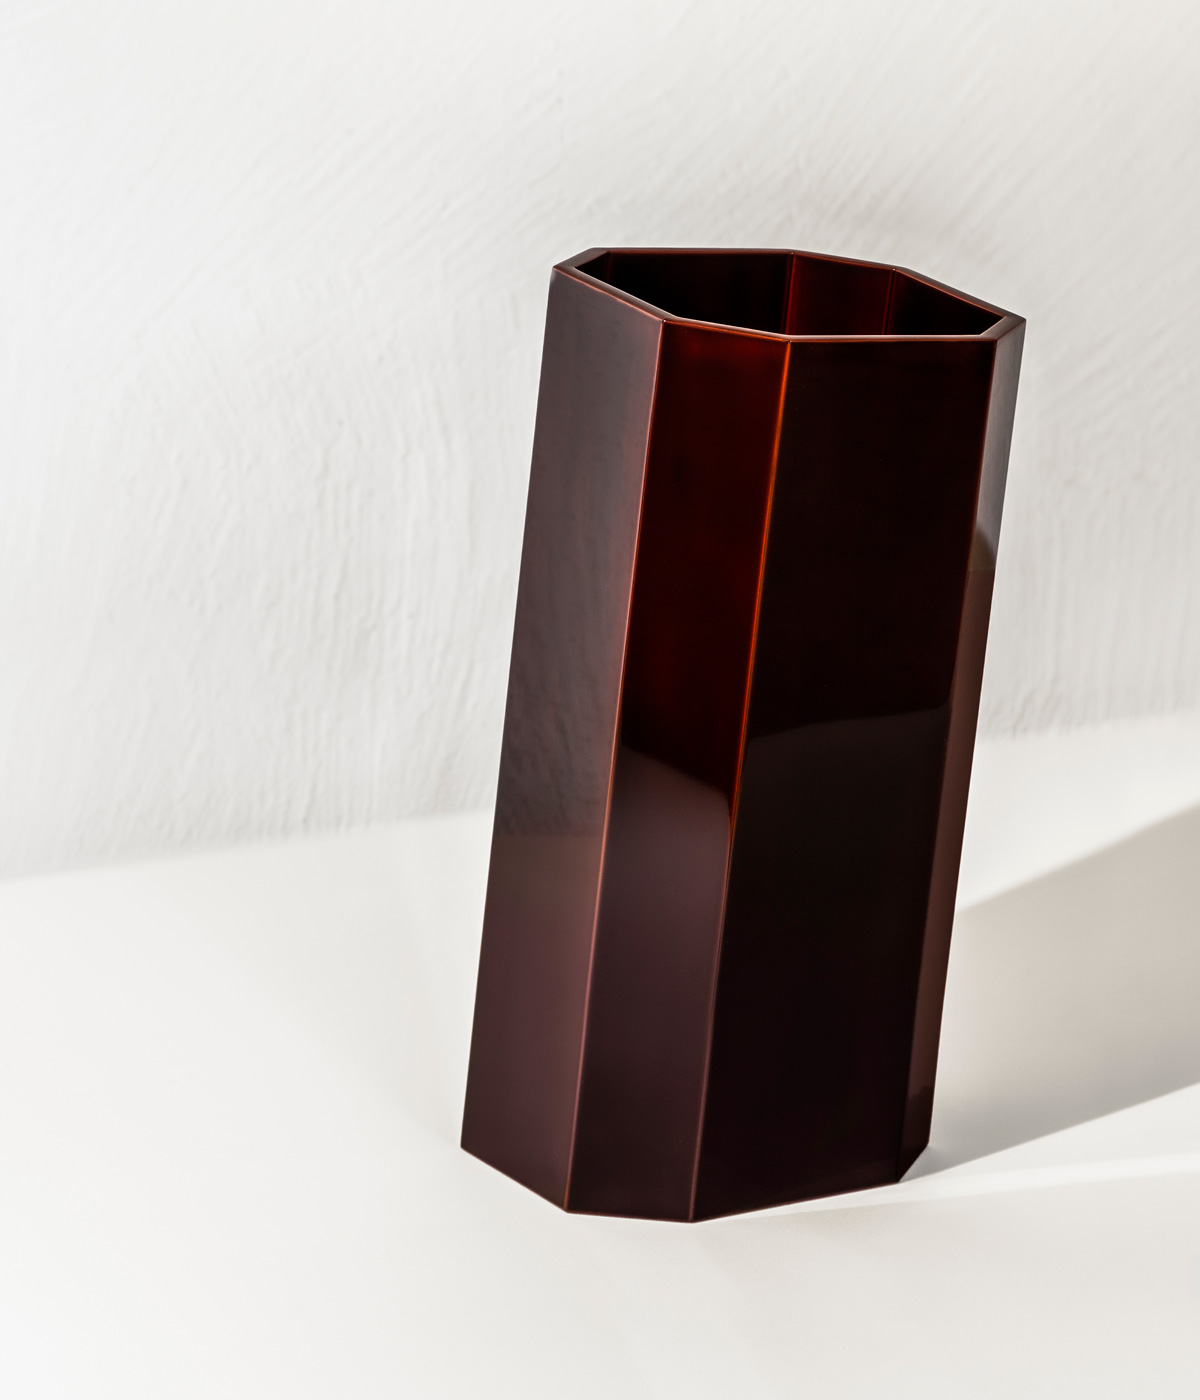 Enzo Mari's lacquered objects go on show at Rome's…